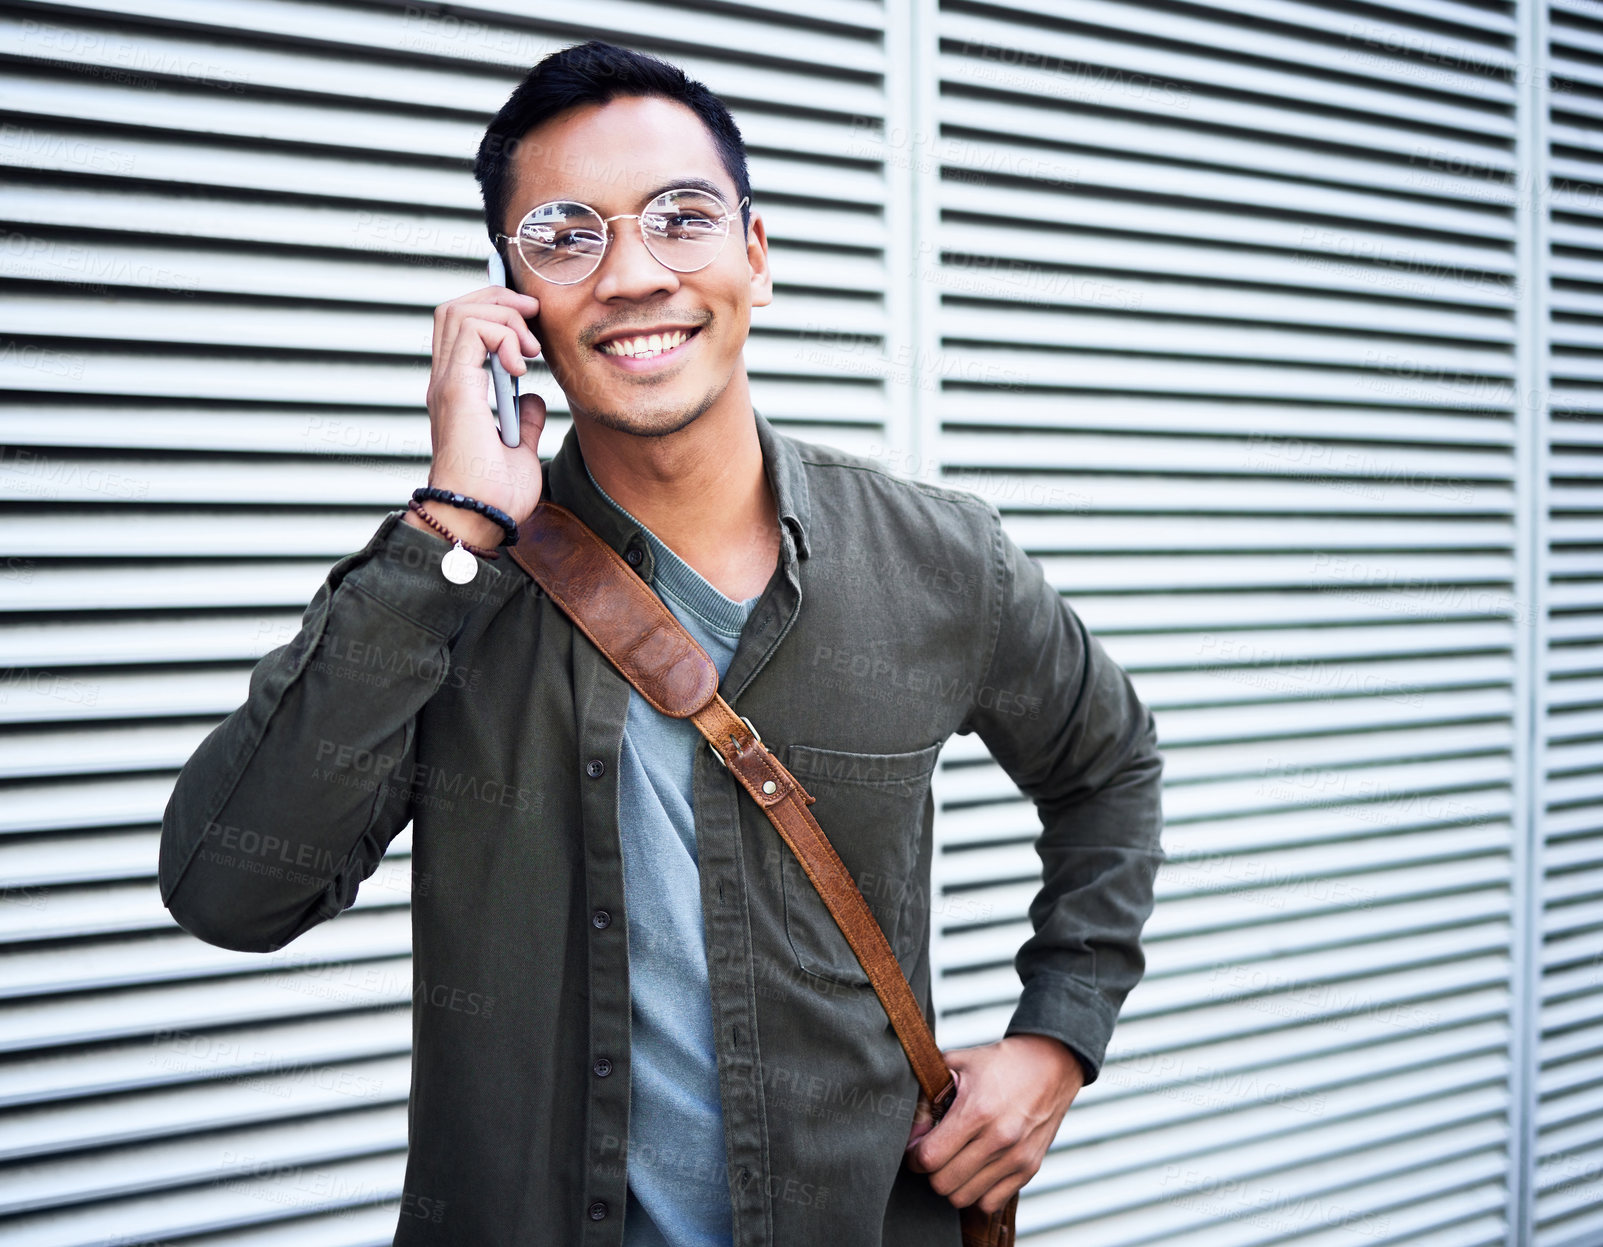 Buy stock photo Shot of a young man using a phone in the city